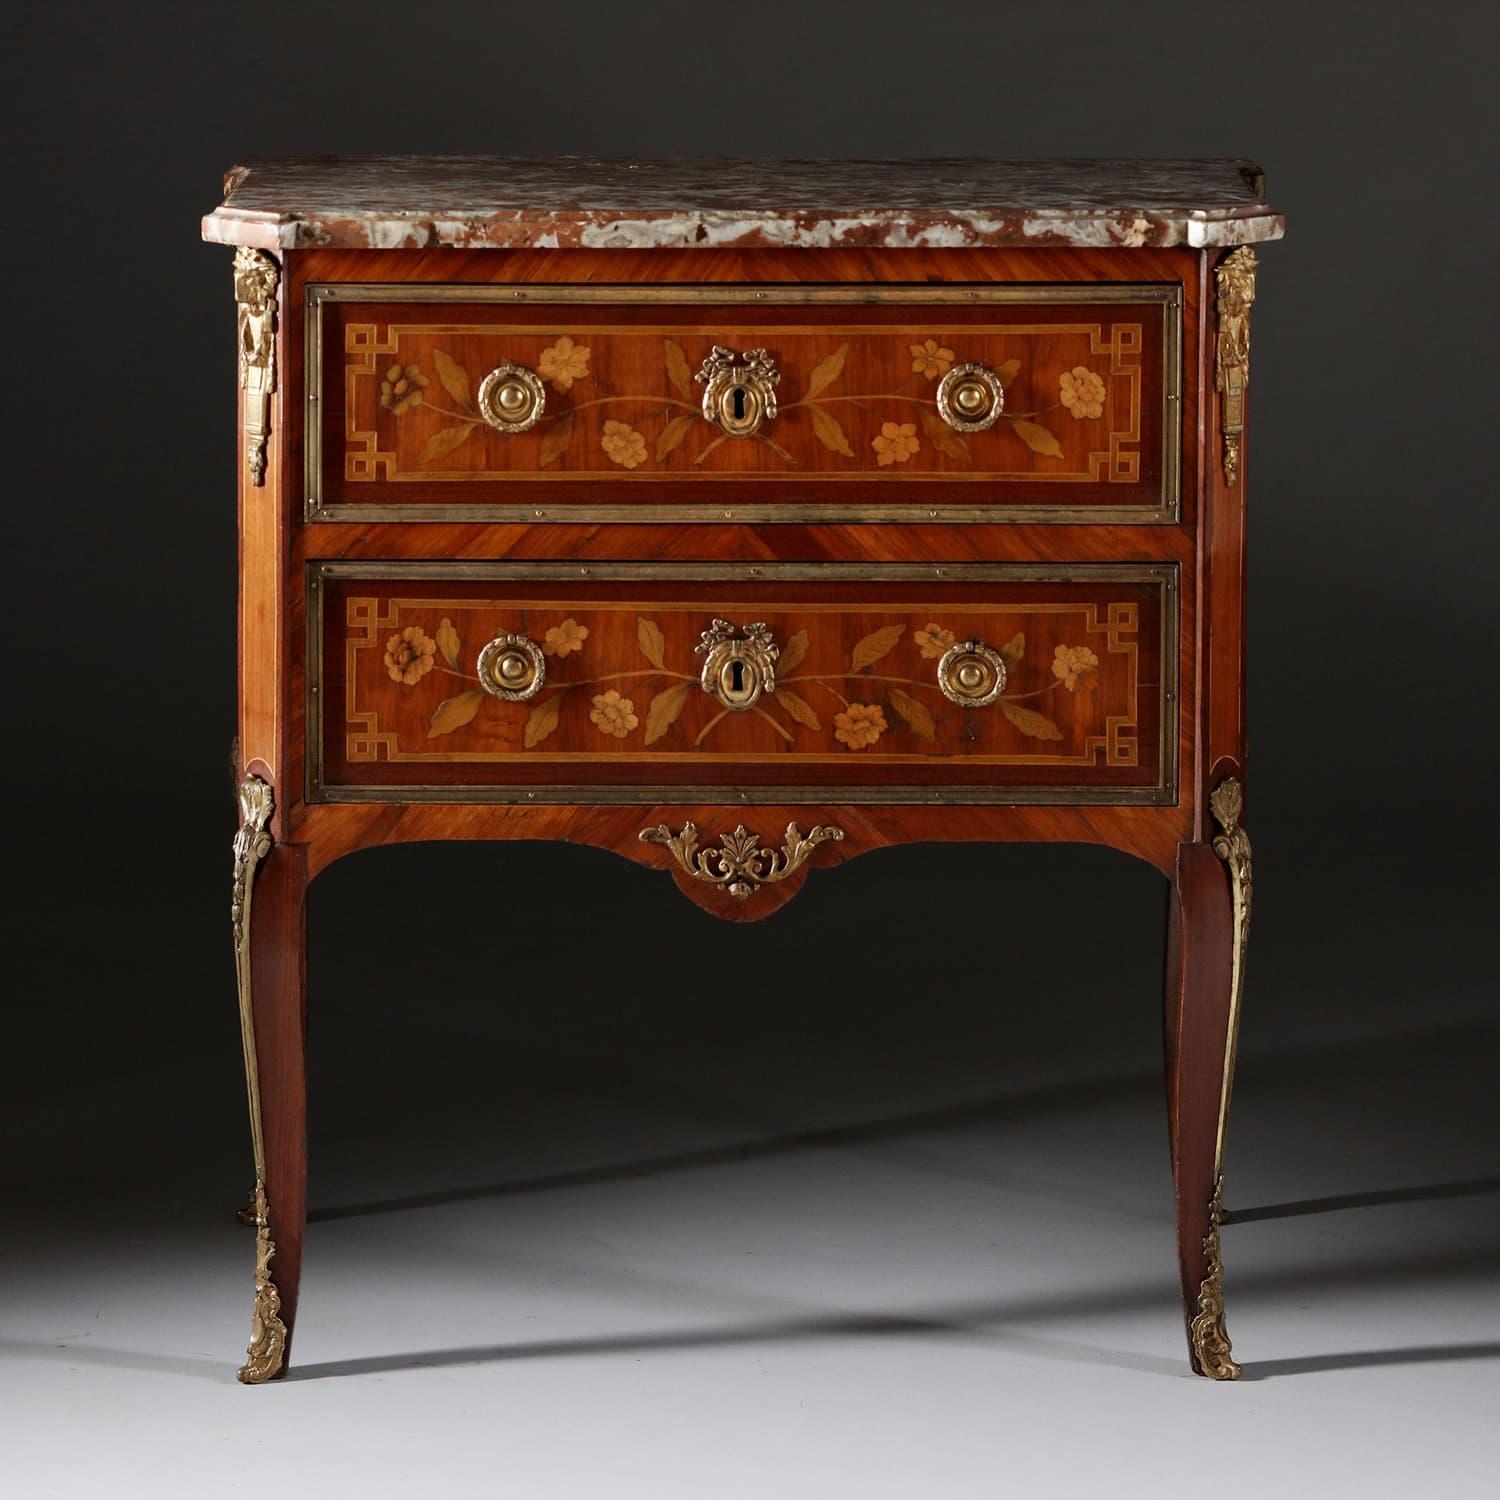 A fine late 18th-century master cabinet maker marquetry commode, supporting a rouge Languedoc marble top with shaped profile, the commode with two short drawers with floral marquetry, original gilt bronze border and lion mask mounts and round drop